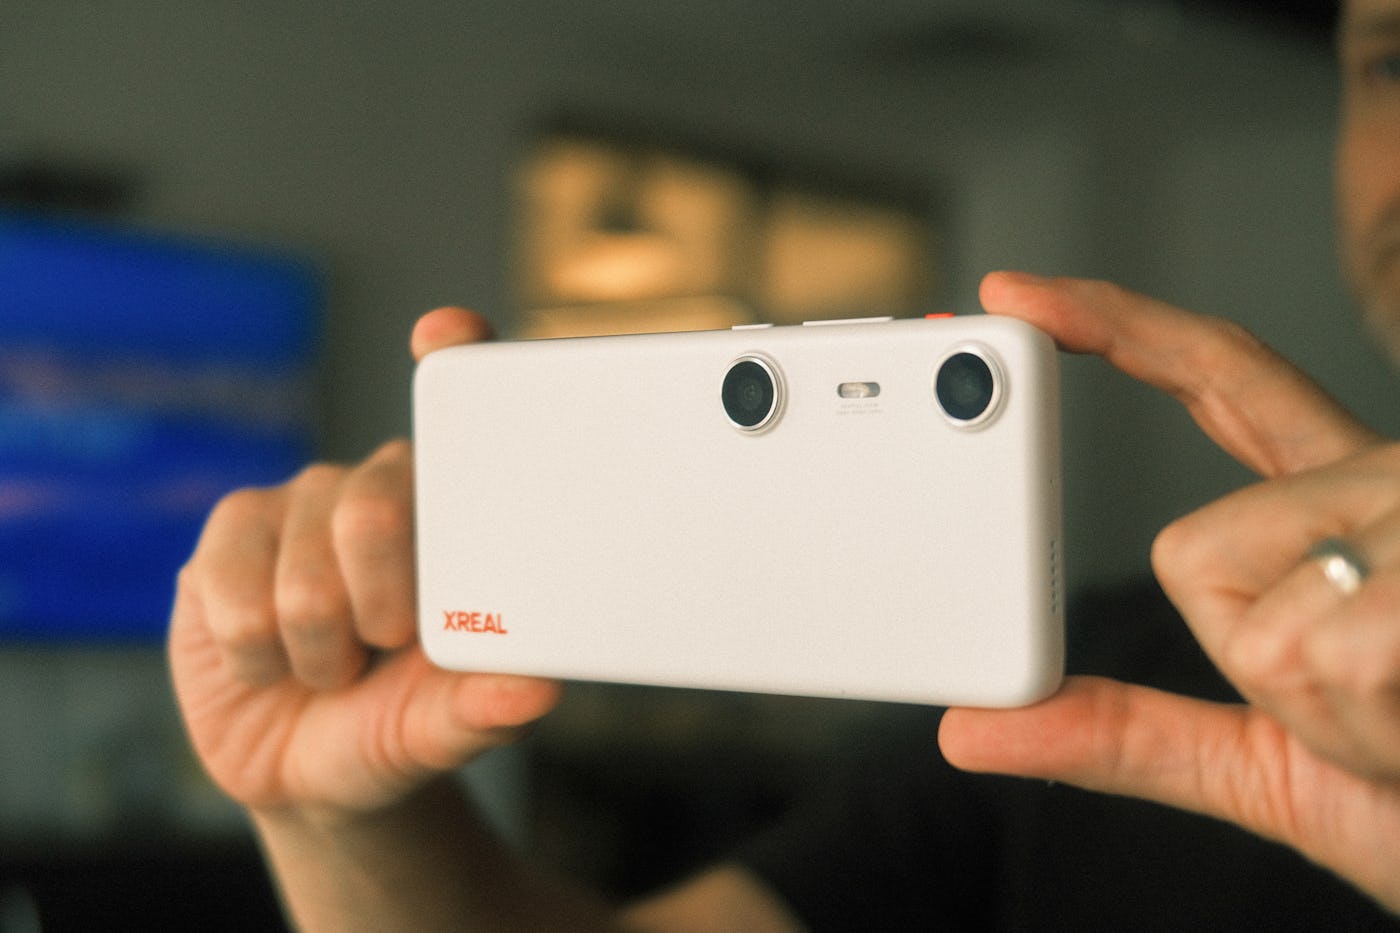 The Xreal Beam Pro has dual 50-megapixel cameras for capturing 3D videos and photos.